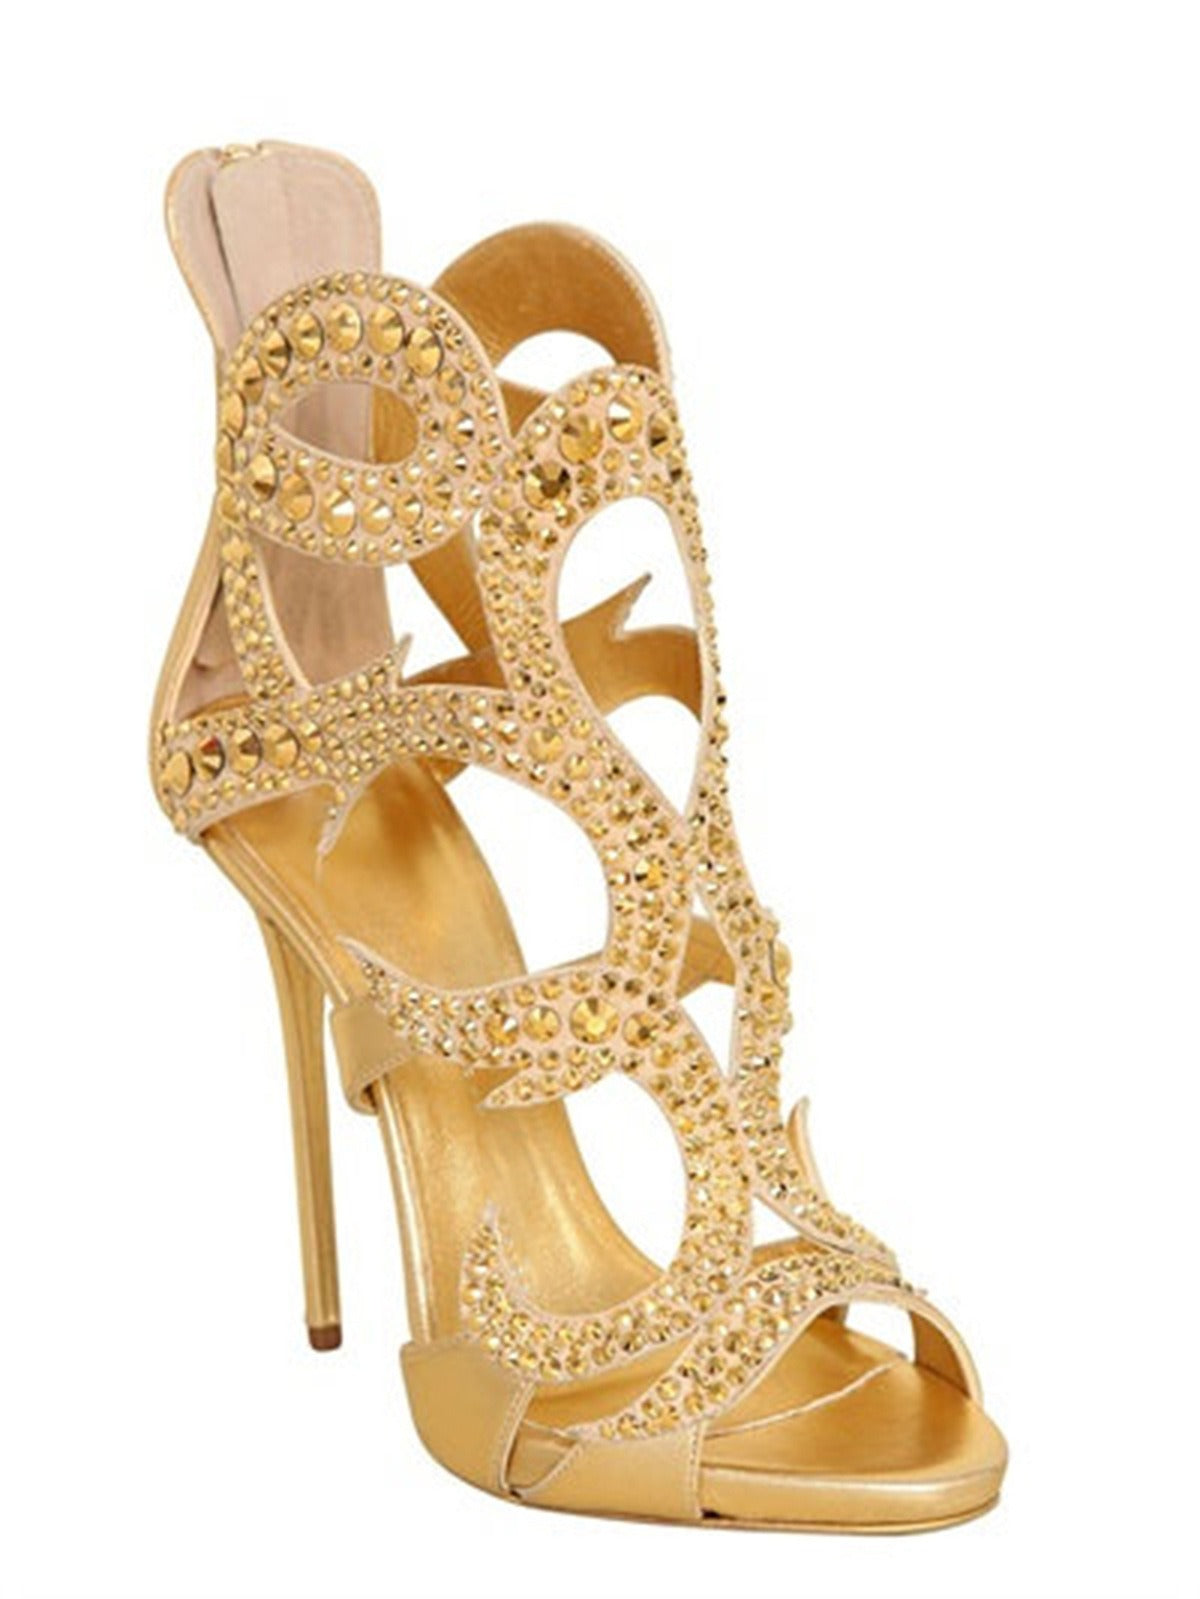 Sexy Luxury High Heel Sandals, Thin Heel Womens Shoes, Banquet Party Shoes, Gold Champagne, Water Diamond, and Fashionable